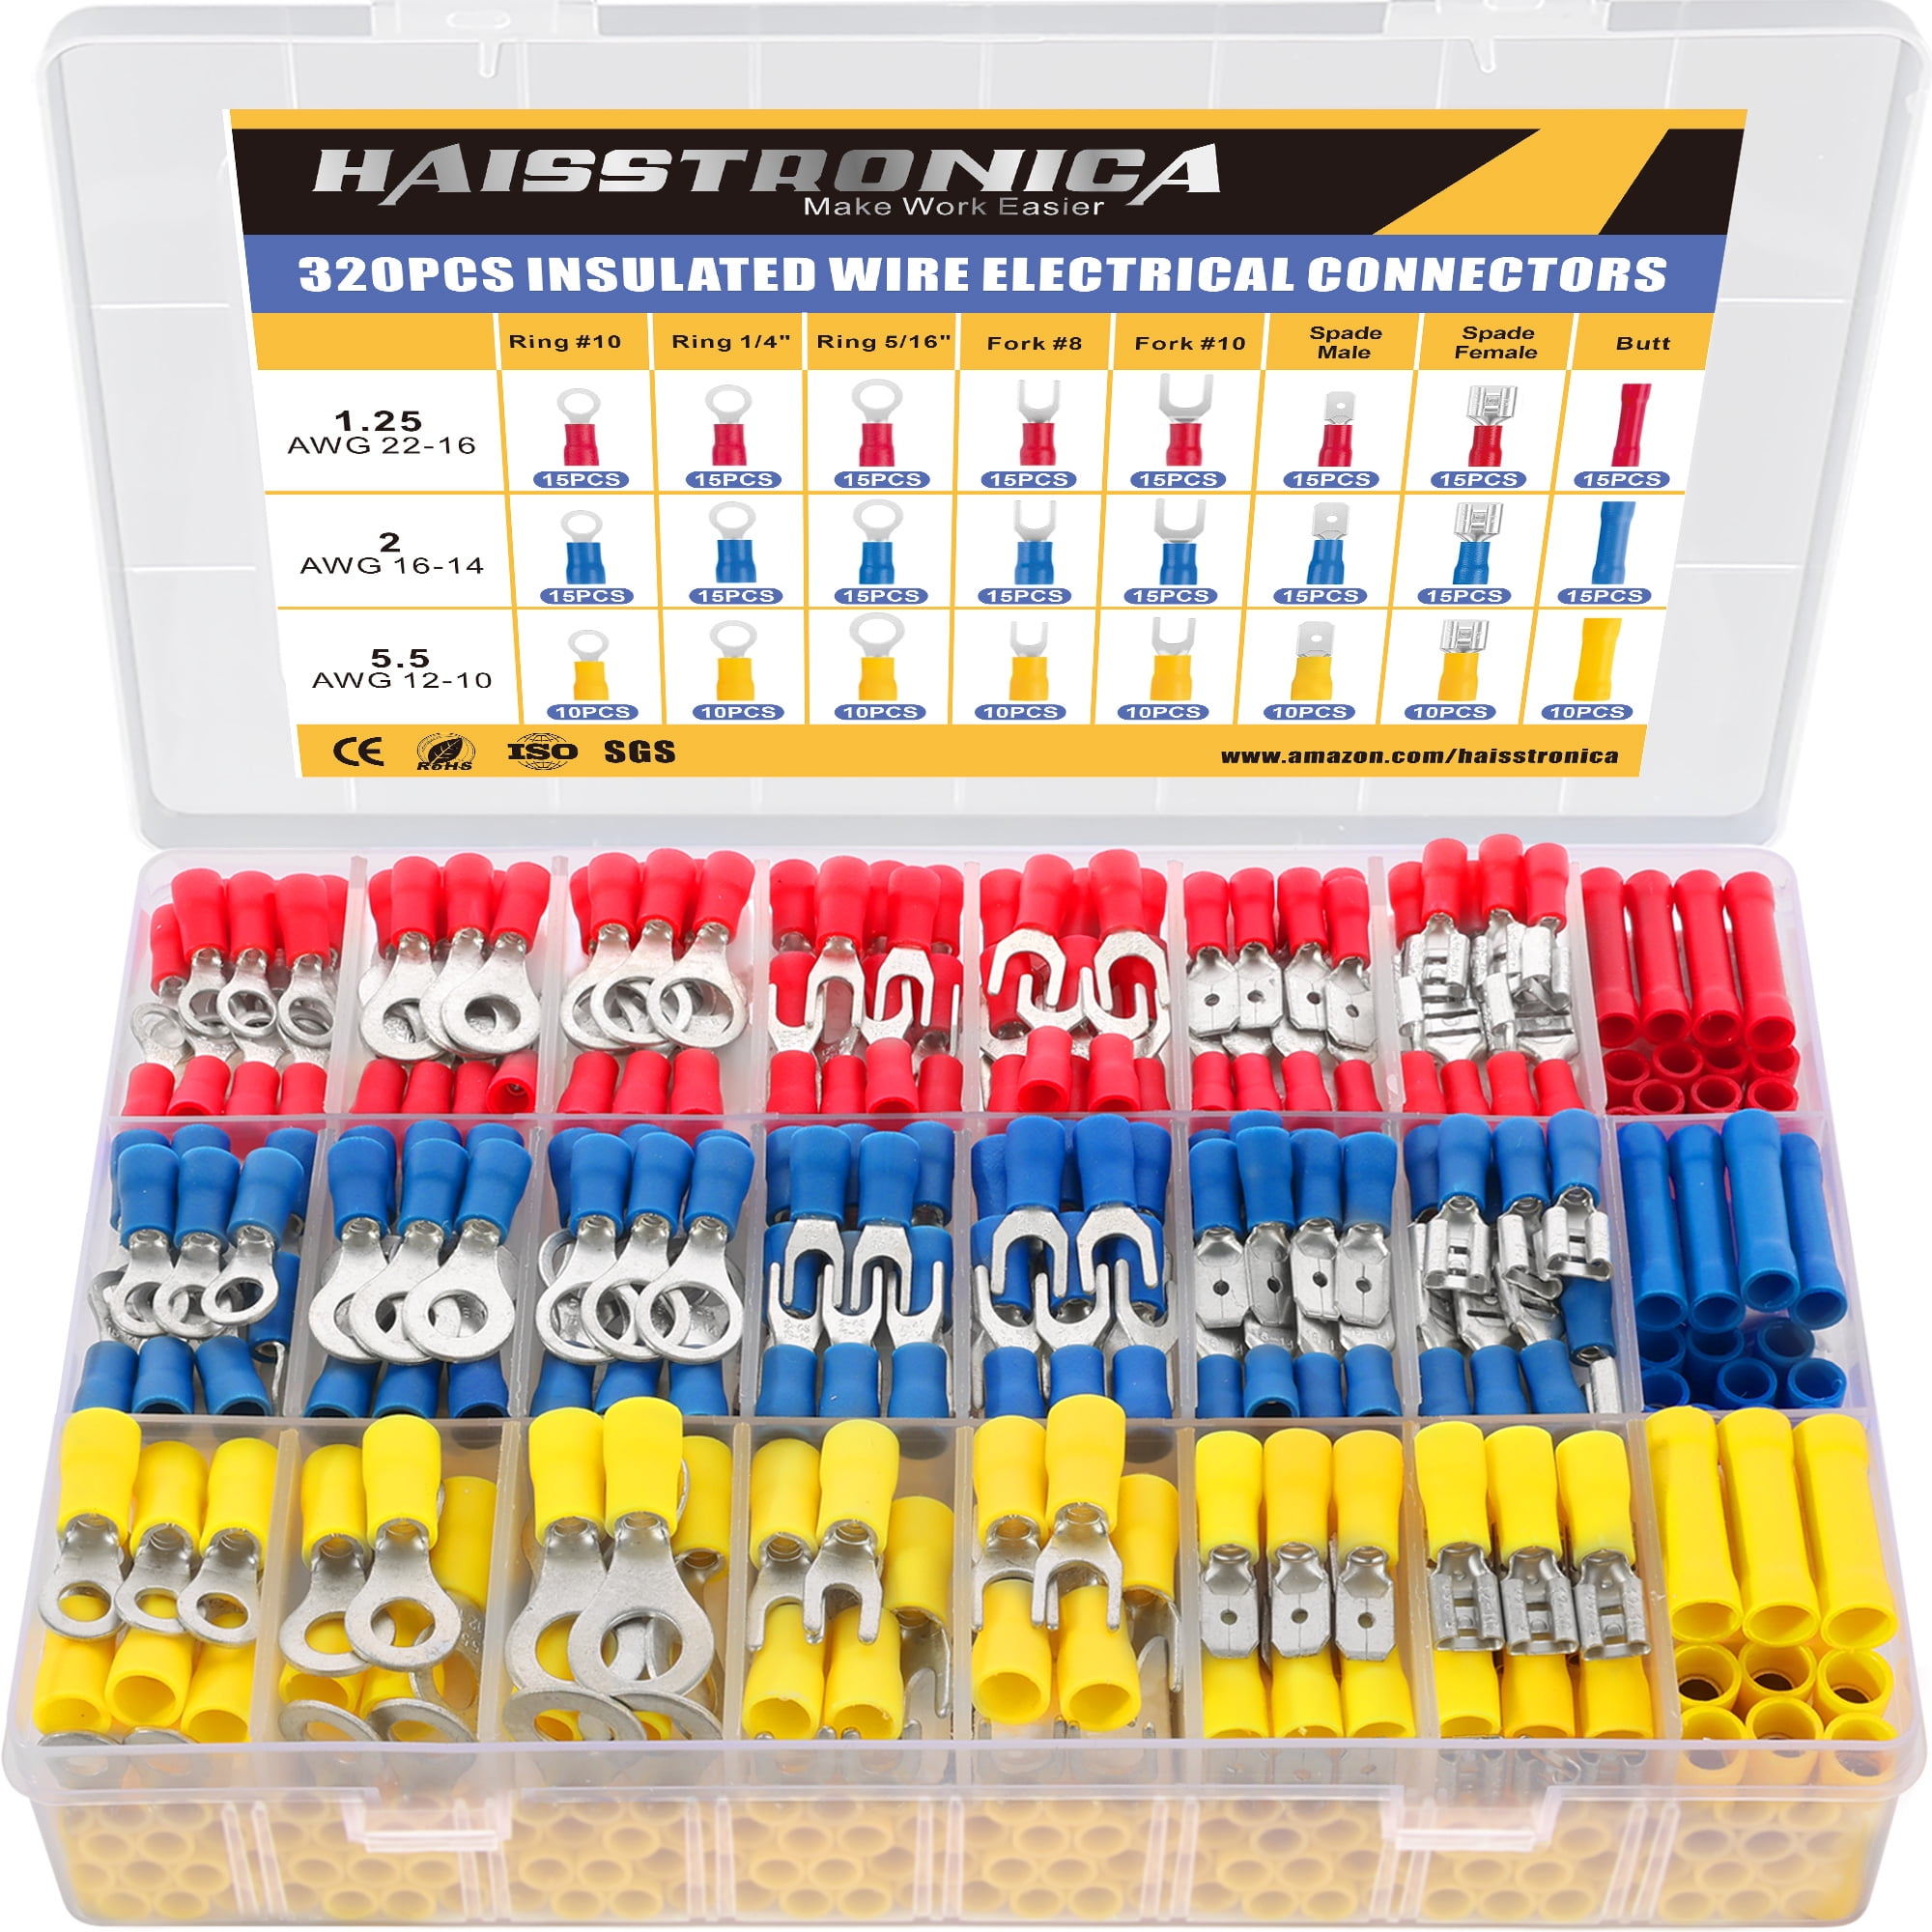 50x T Tap Wire Connectors 18-14 AWG Terminals w Insulated Male Spade Disconnects 